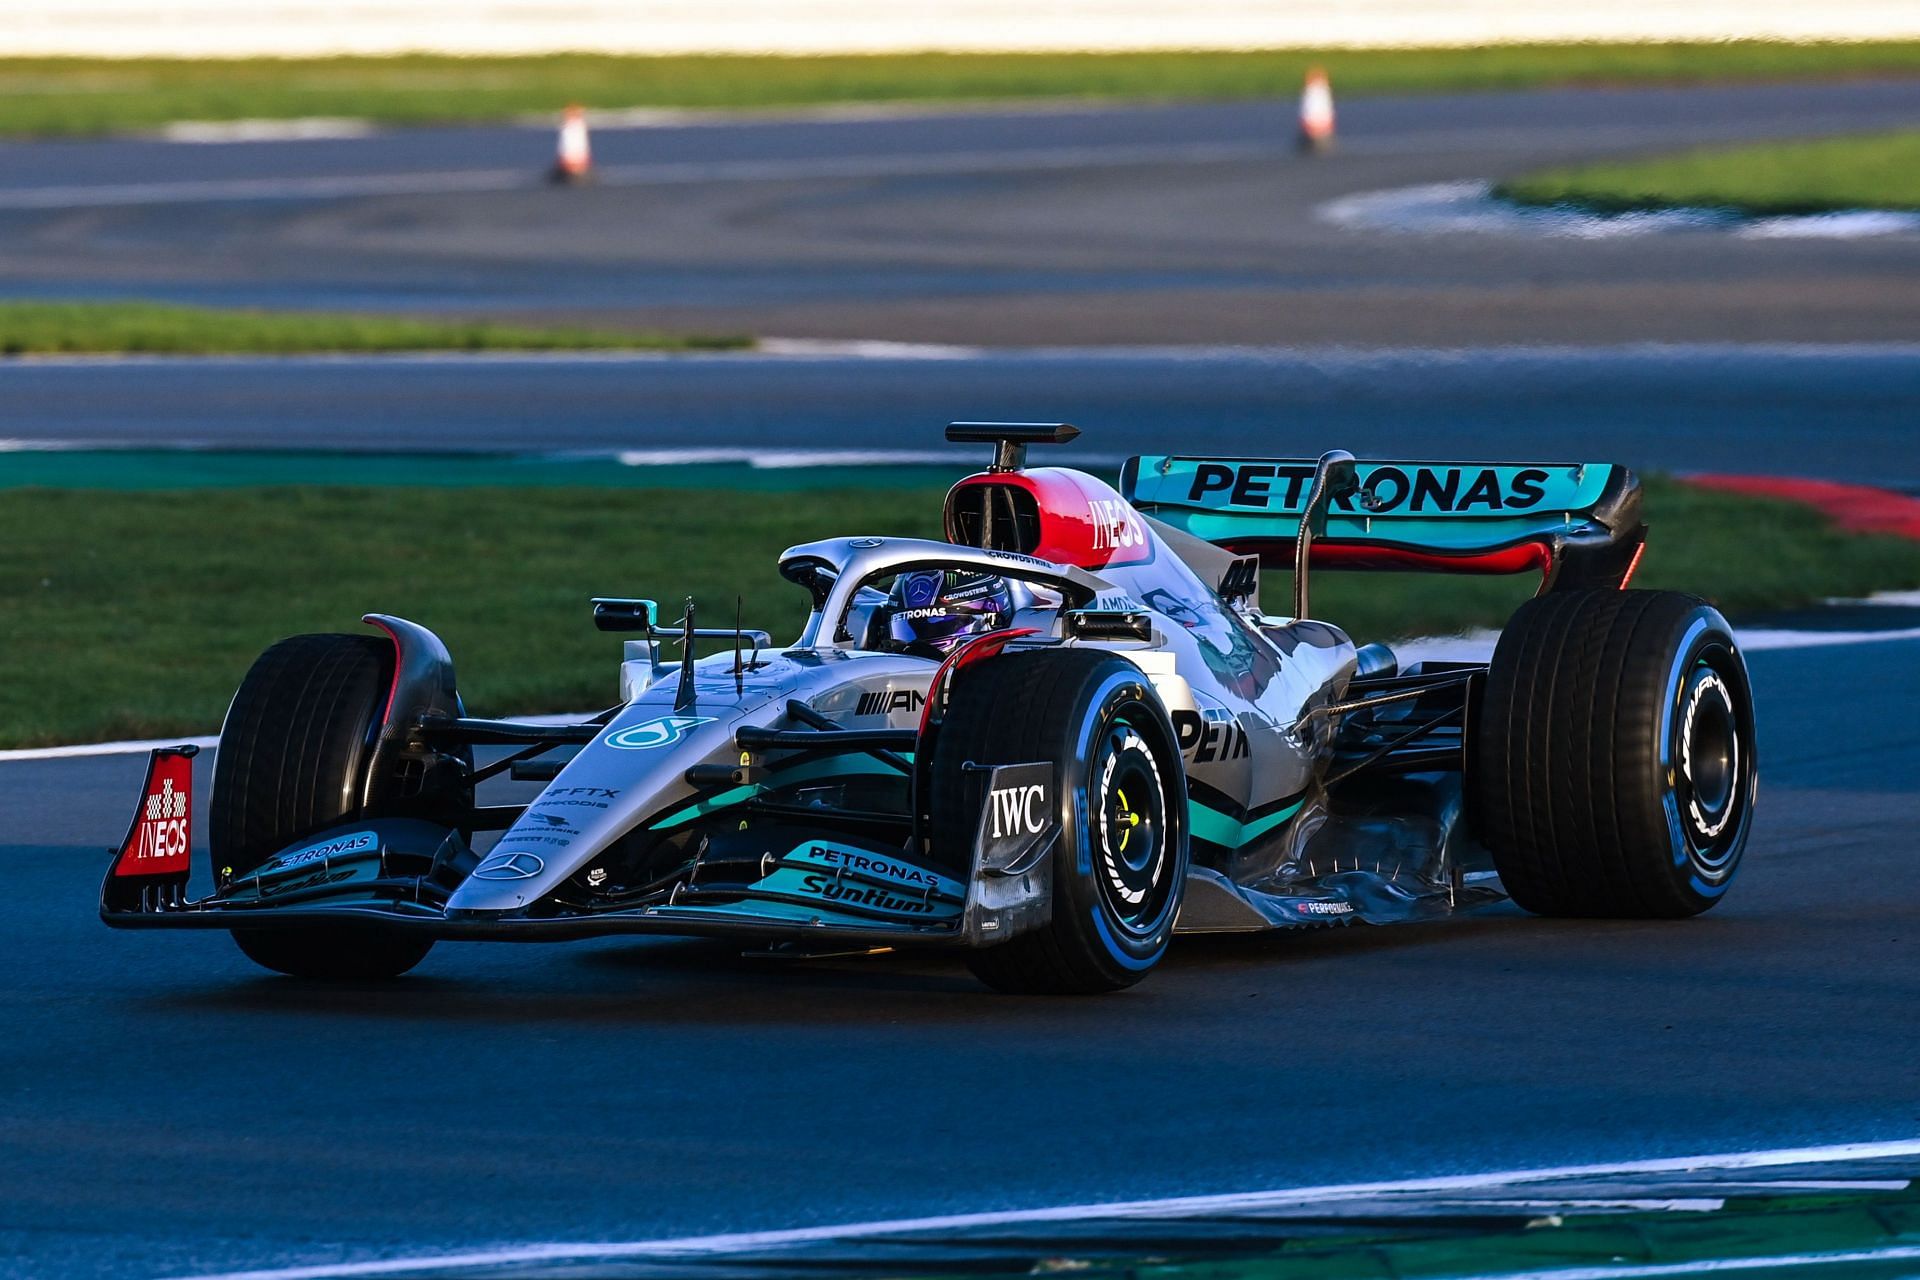 The new Mercedes AMG F1 W13 E Performance that Lewis Hamilton will drive in 2022 (Image Courtesy - @MercedesAMGF1 on Twitter)